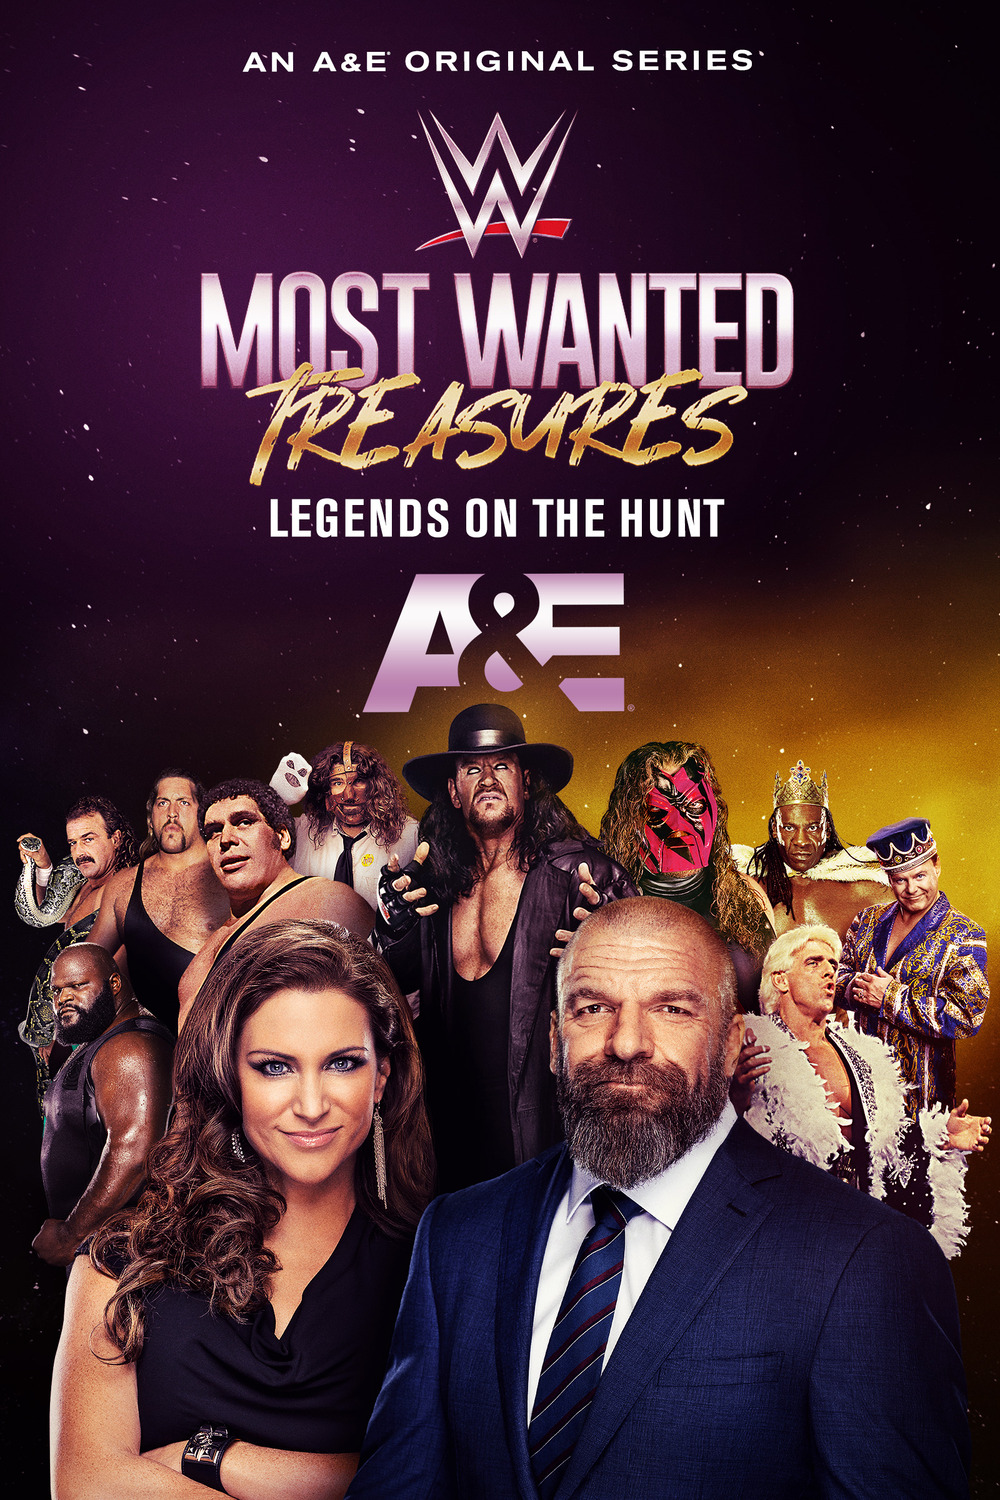 Extra Large TV Poster Image for WWE's Most Wanted Treasures 